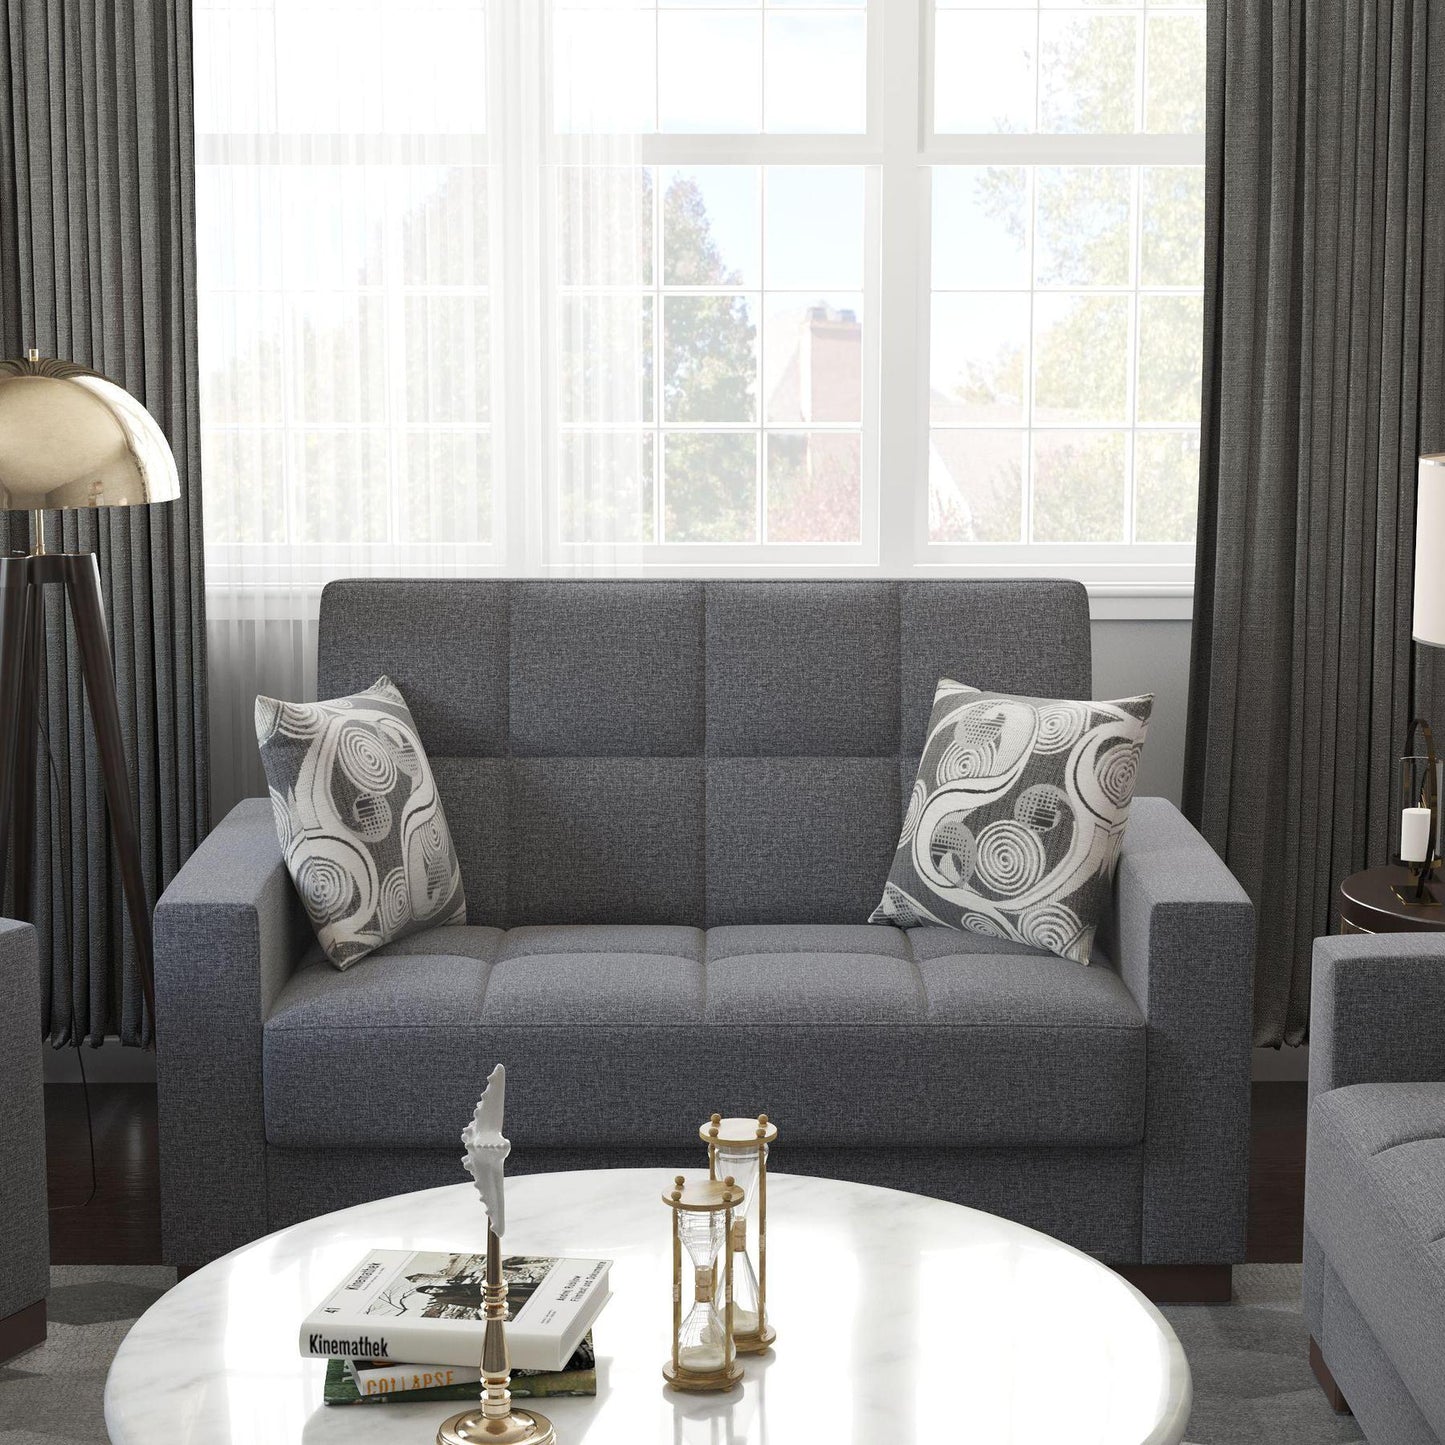 Modern design, Salt and Pepper Gray , Chenille upholstered convertible sleeper Loveseat with underseat storage from Voyage Track by Ottomanson in living room lifestyle setting by itself. This Loveseat measures 67 inches width by 36 inches depth by 41 inches height.